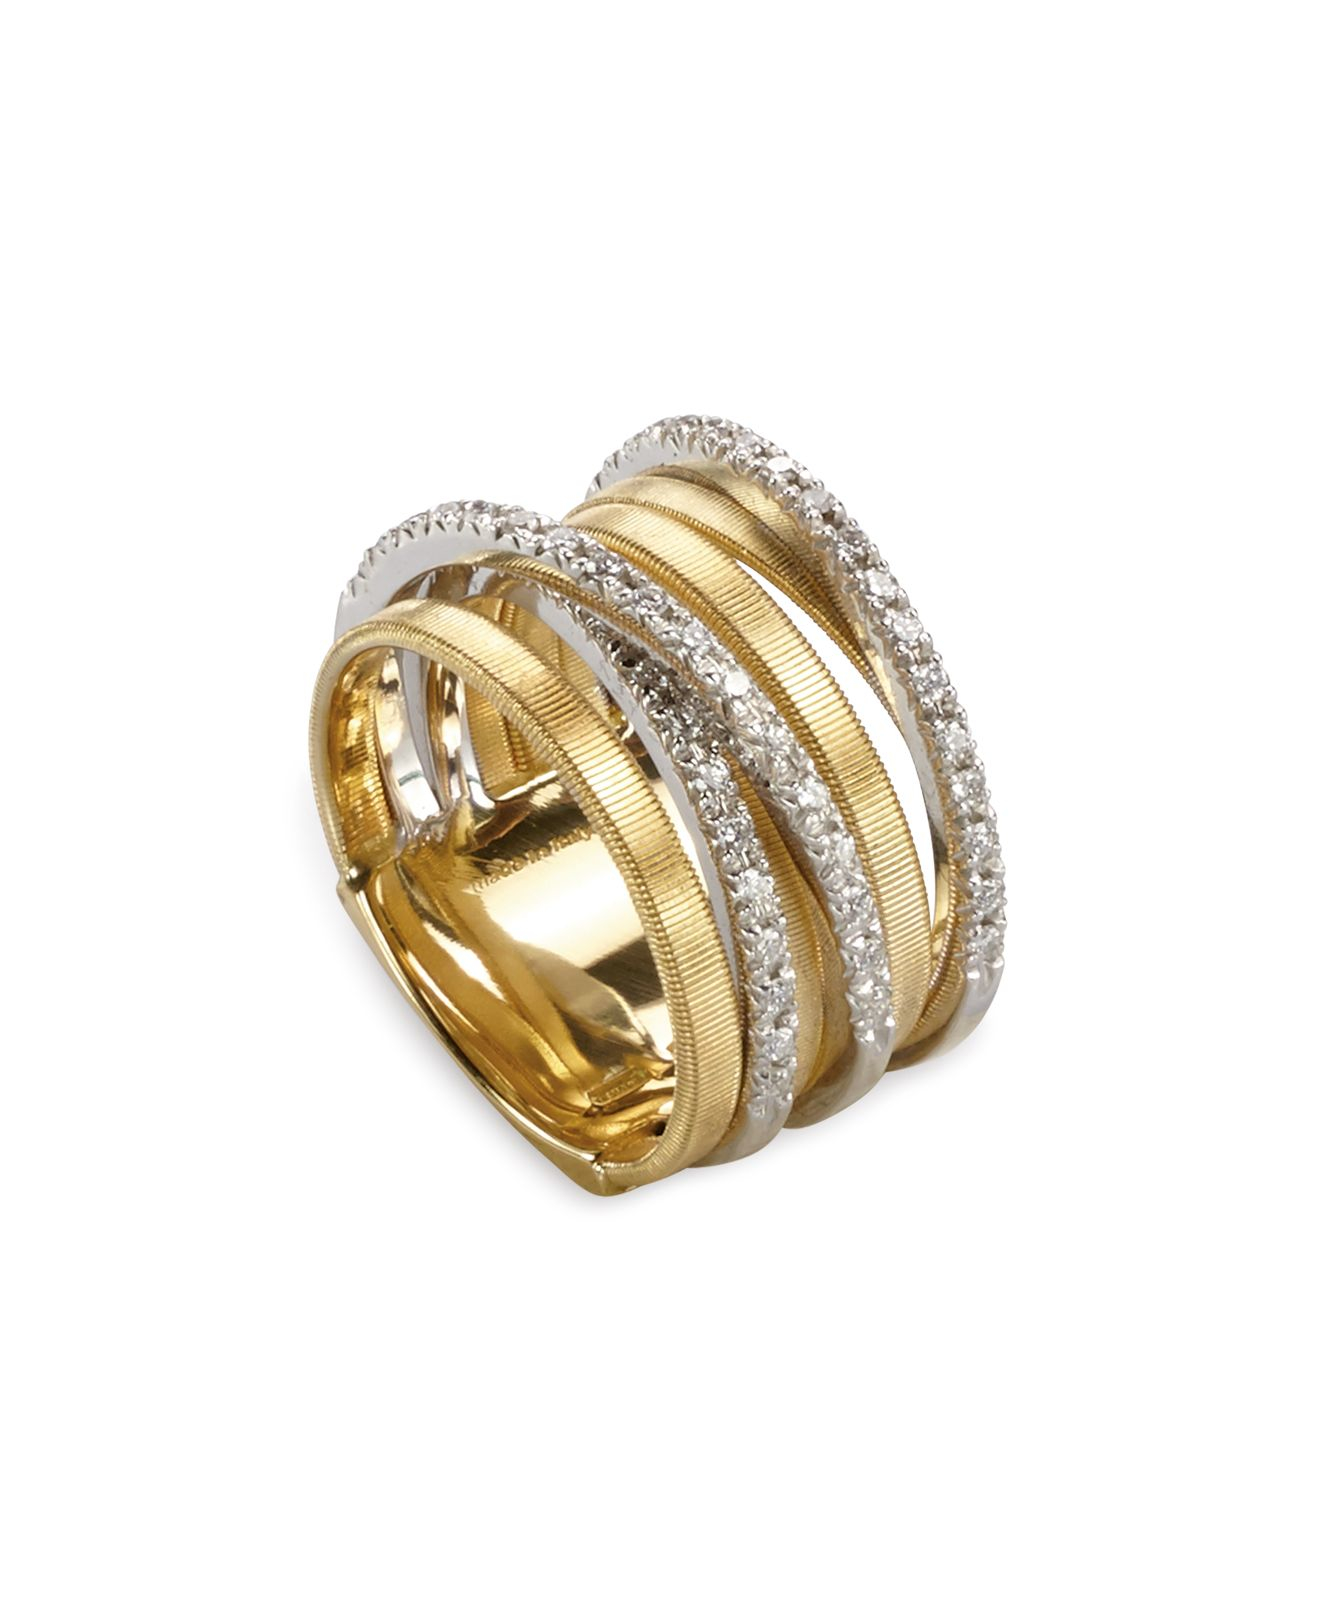 Marco bicego 18k Yellow Gold Goa Seven Row Ring With Diamonds in ...